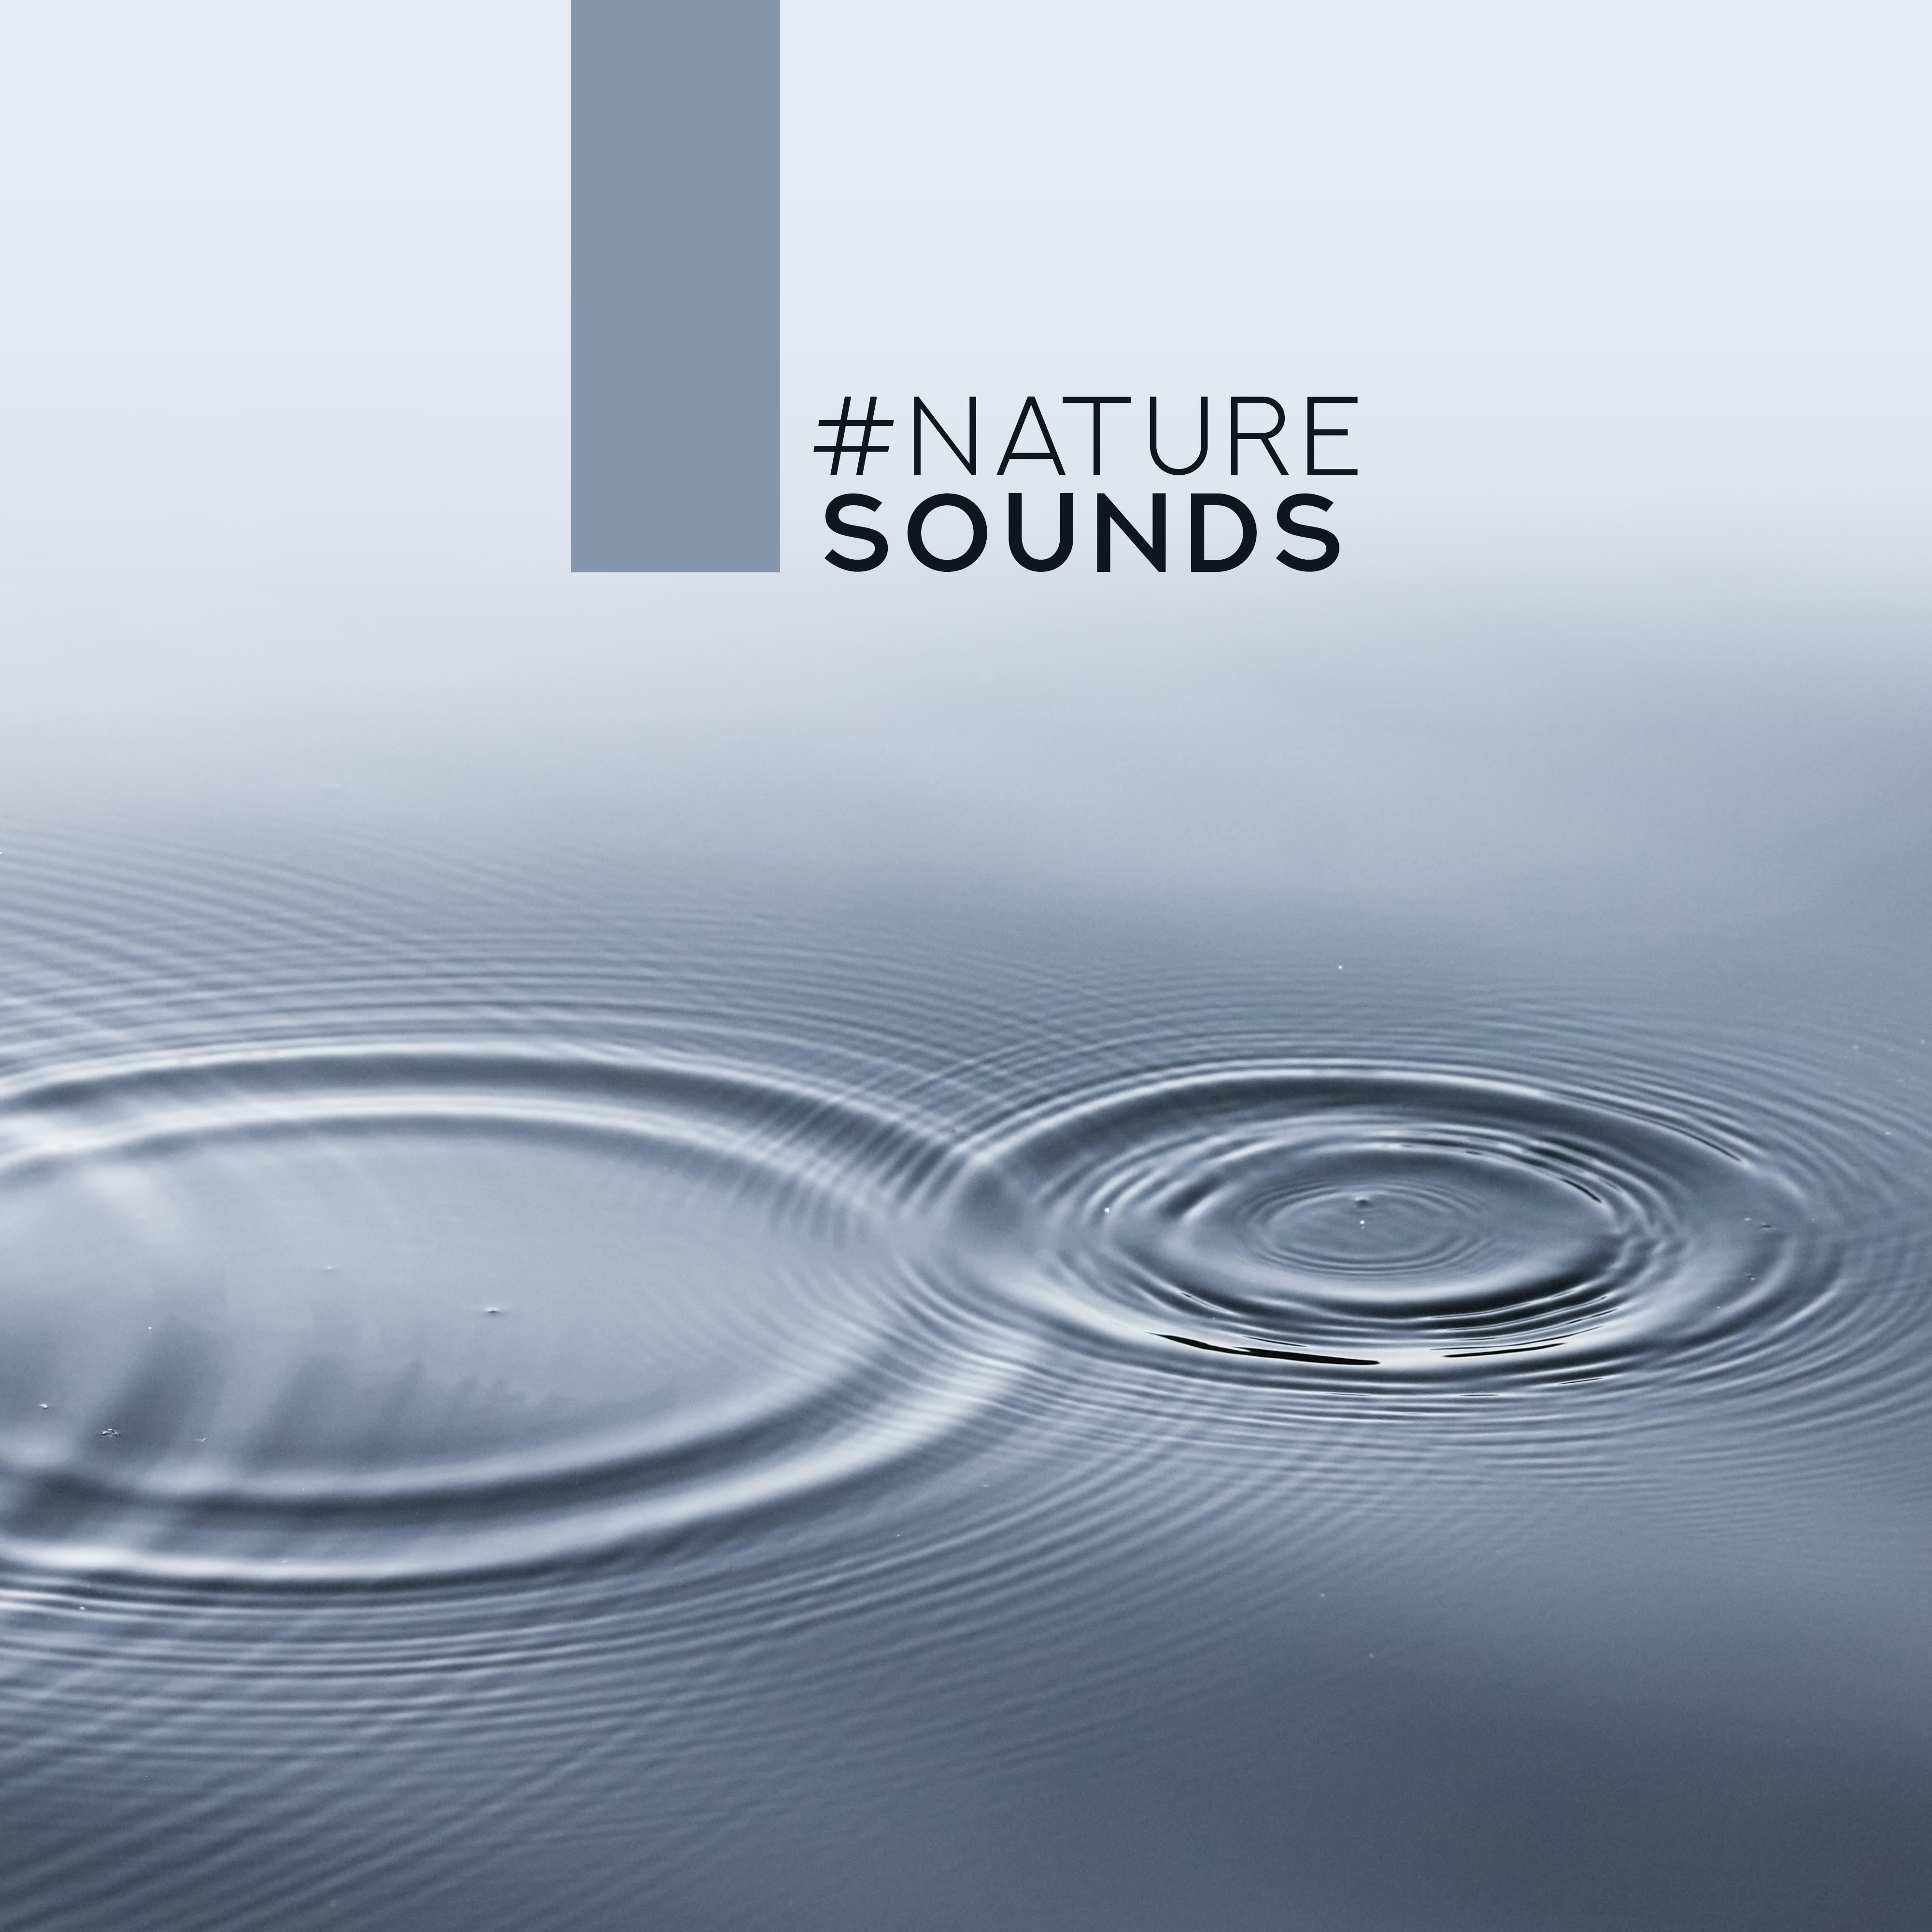 #nature sounds – Relaxing Music for Spa, Sleep, Relaxation, Nature Music, Soothing Nature Sounds to Calm Down